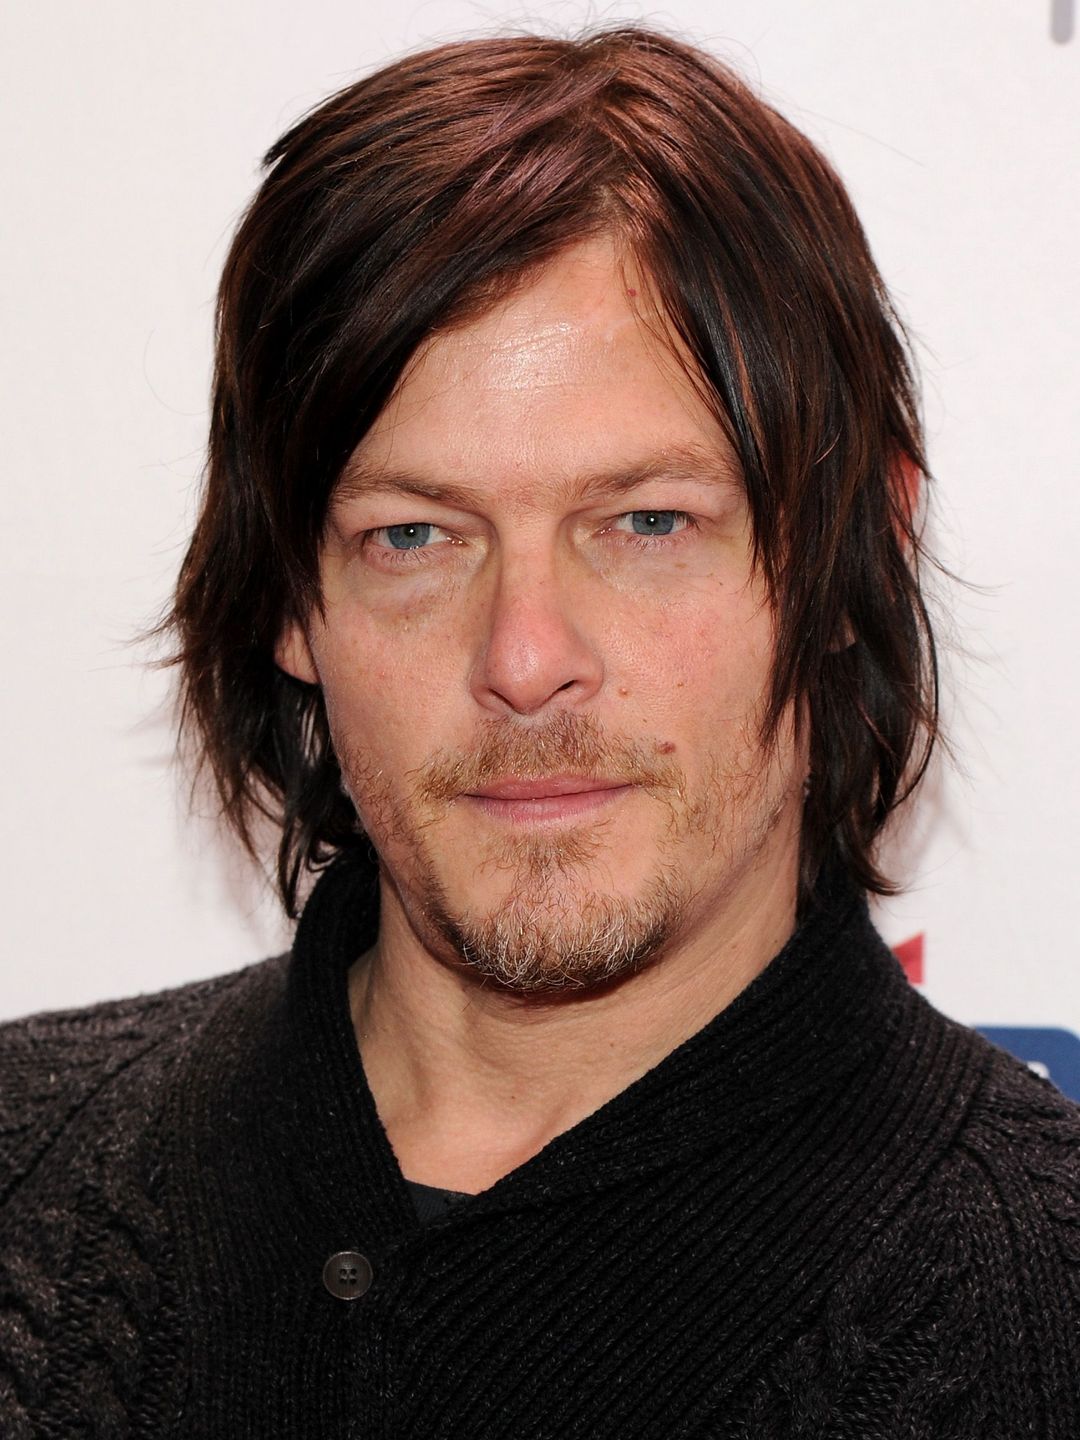 Norman Reedus how did he became famous